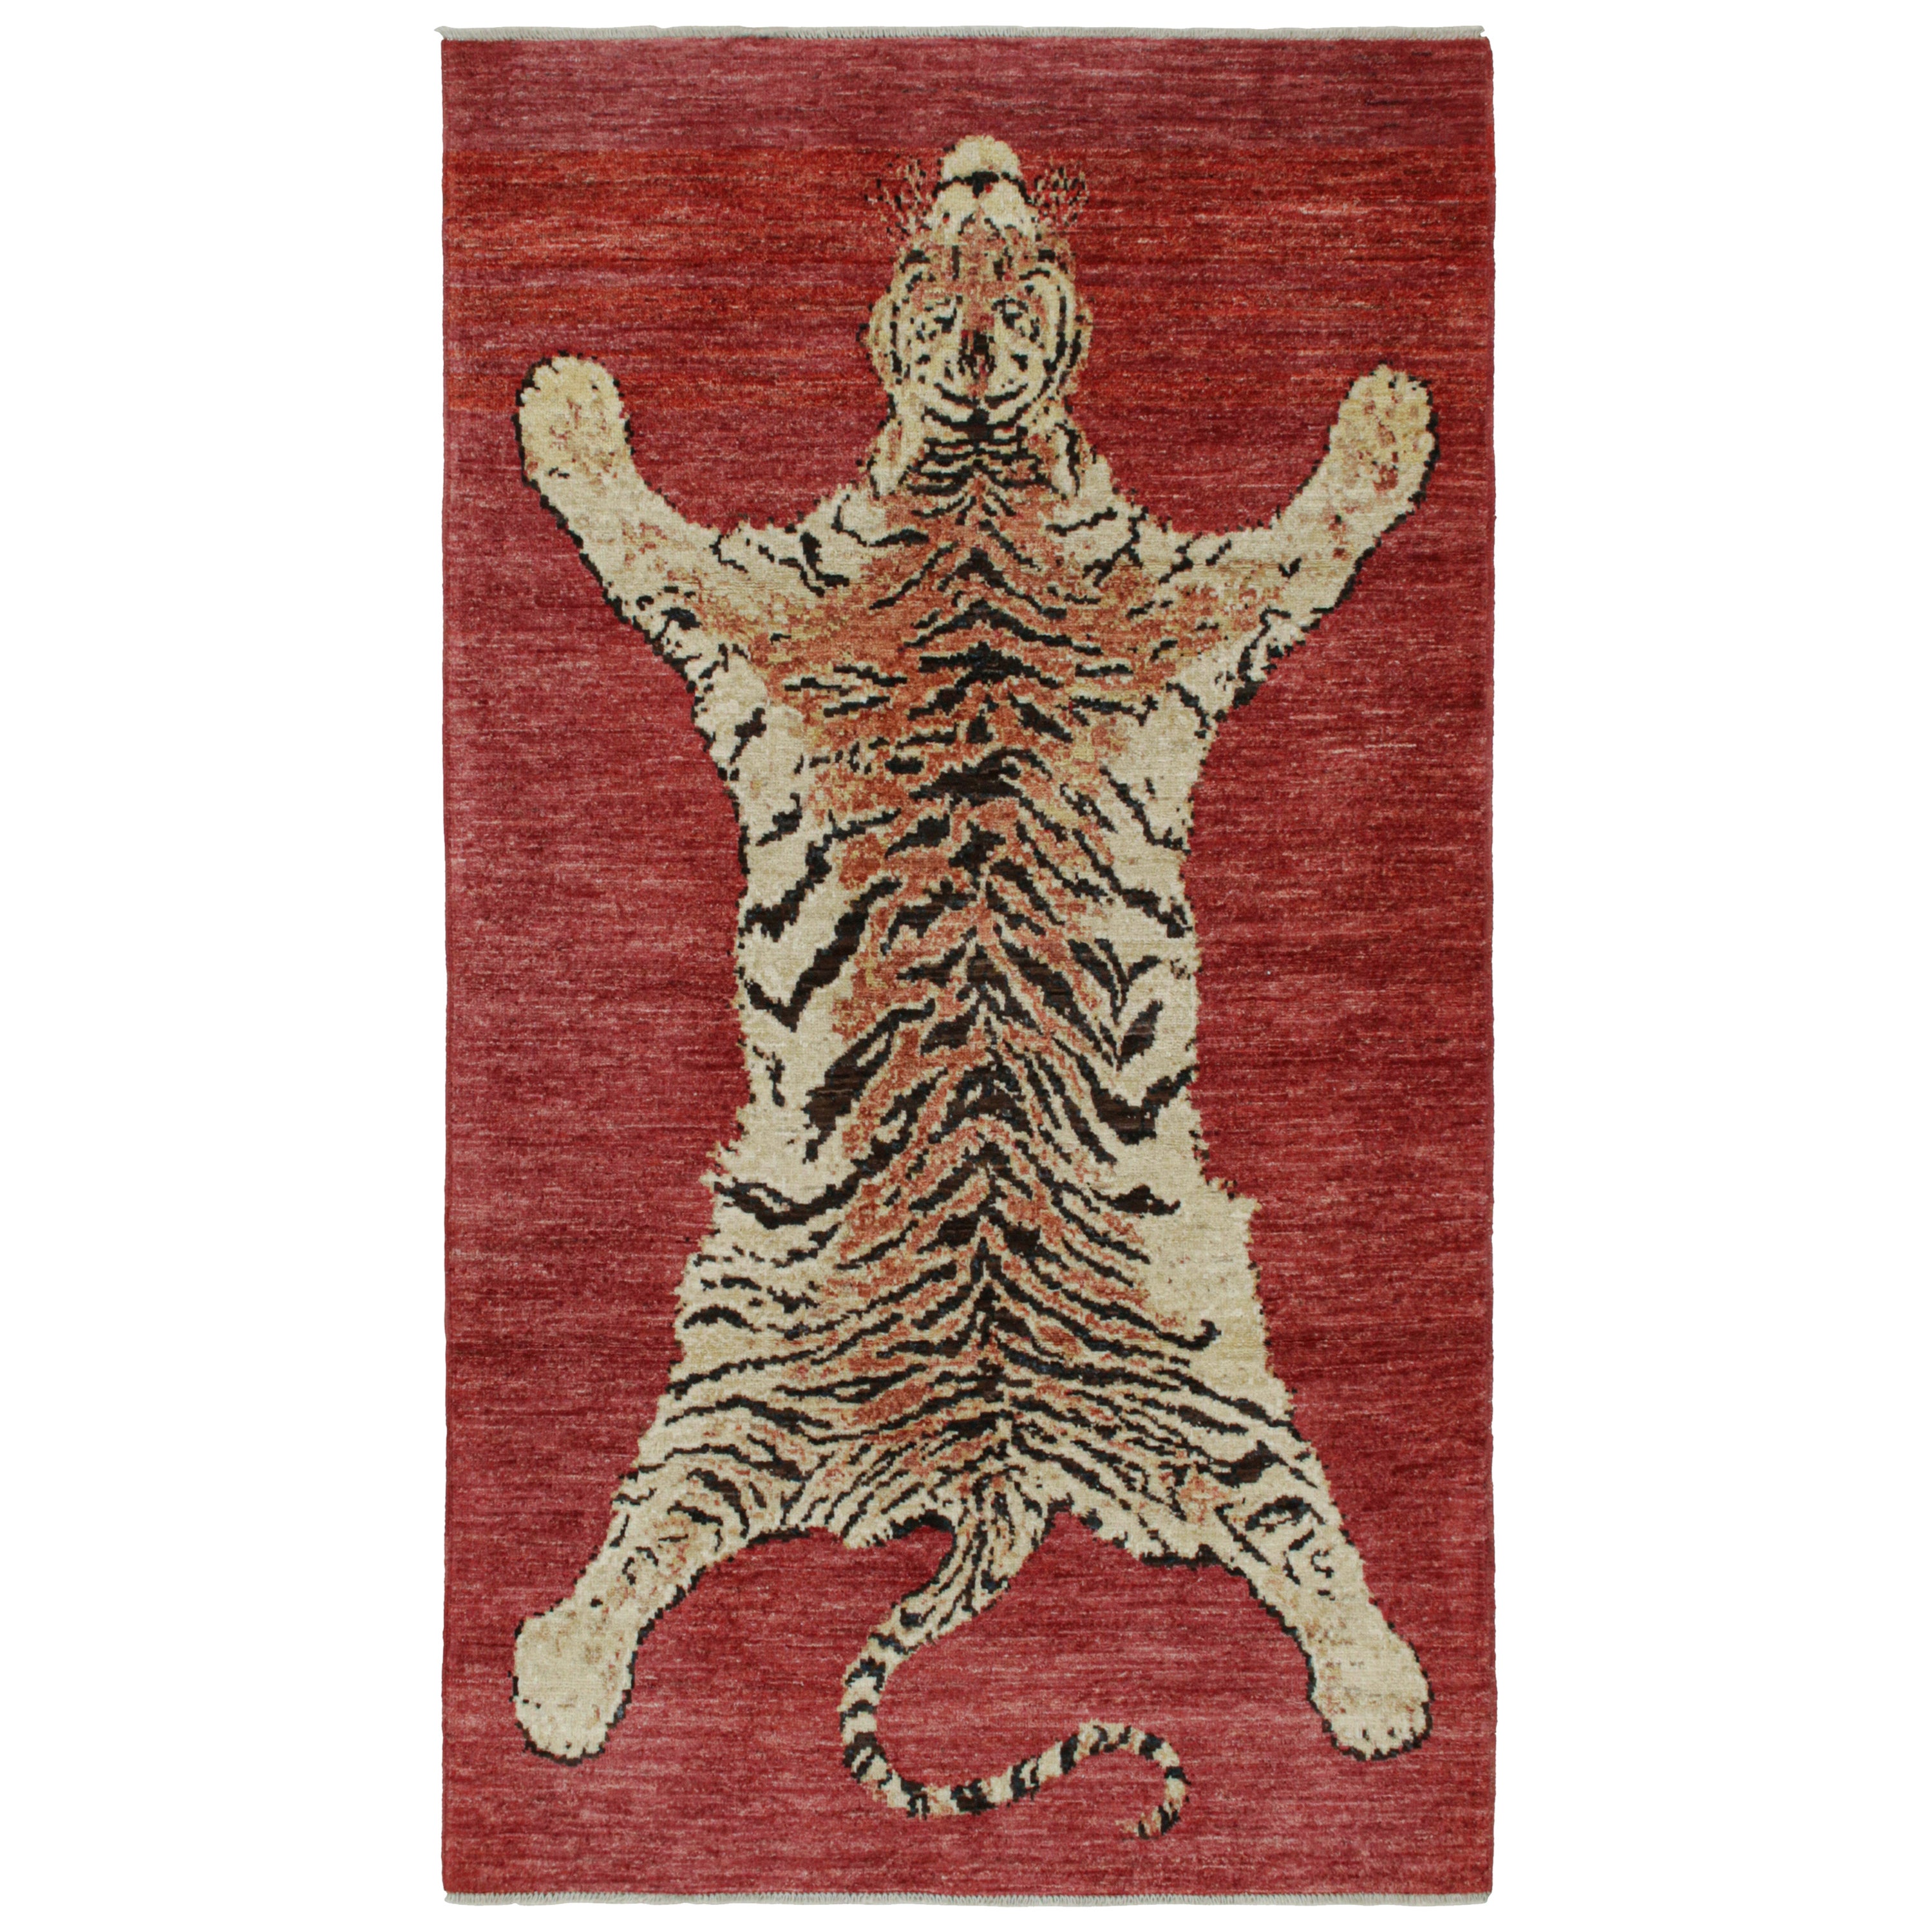 Rug & Kilim’s Tiger-Skin Rug in Red with Beige-Brown Pictorial For Sale